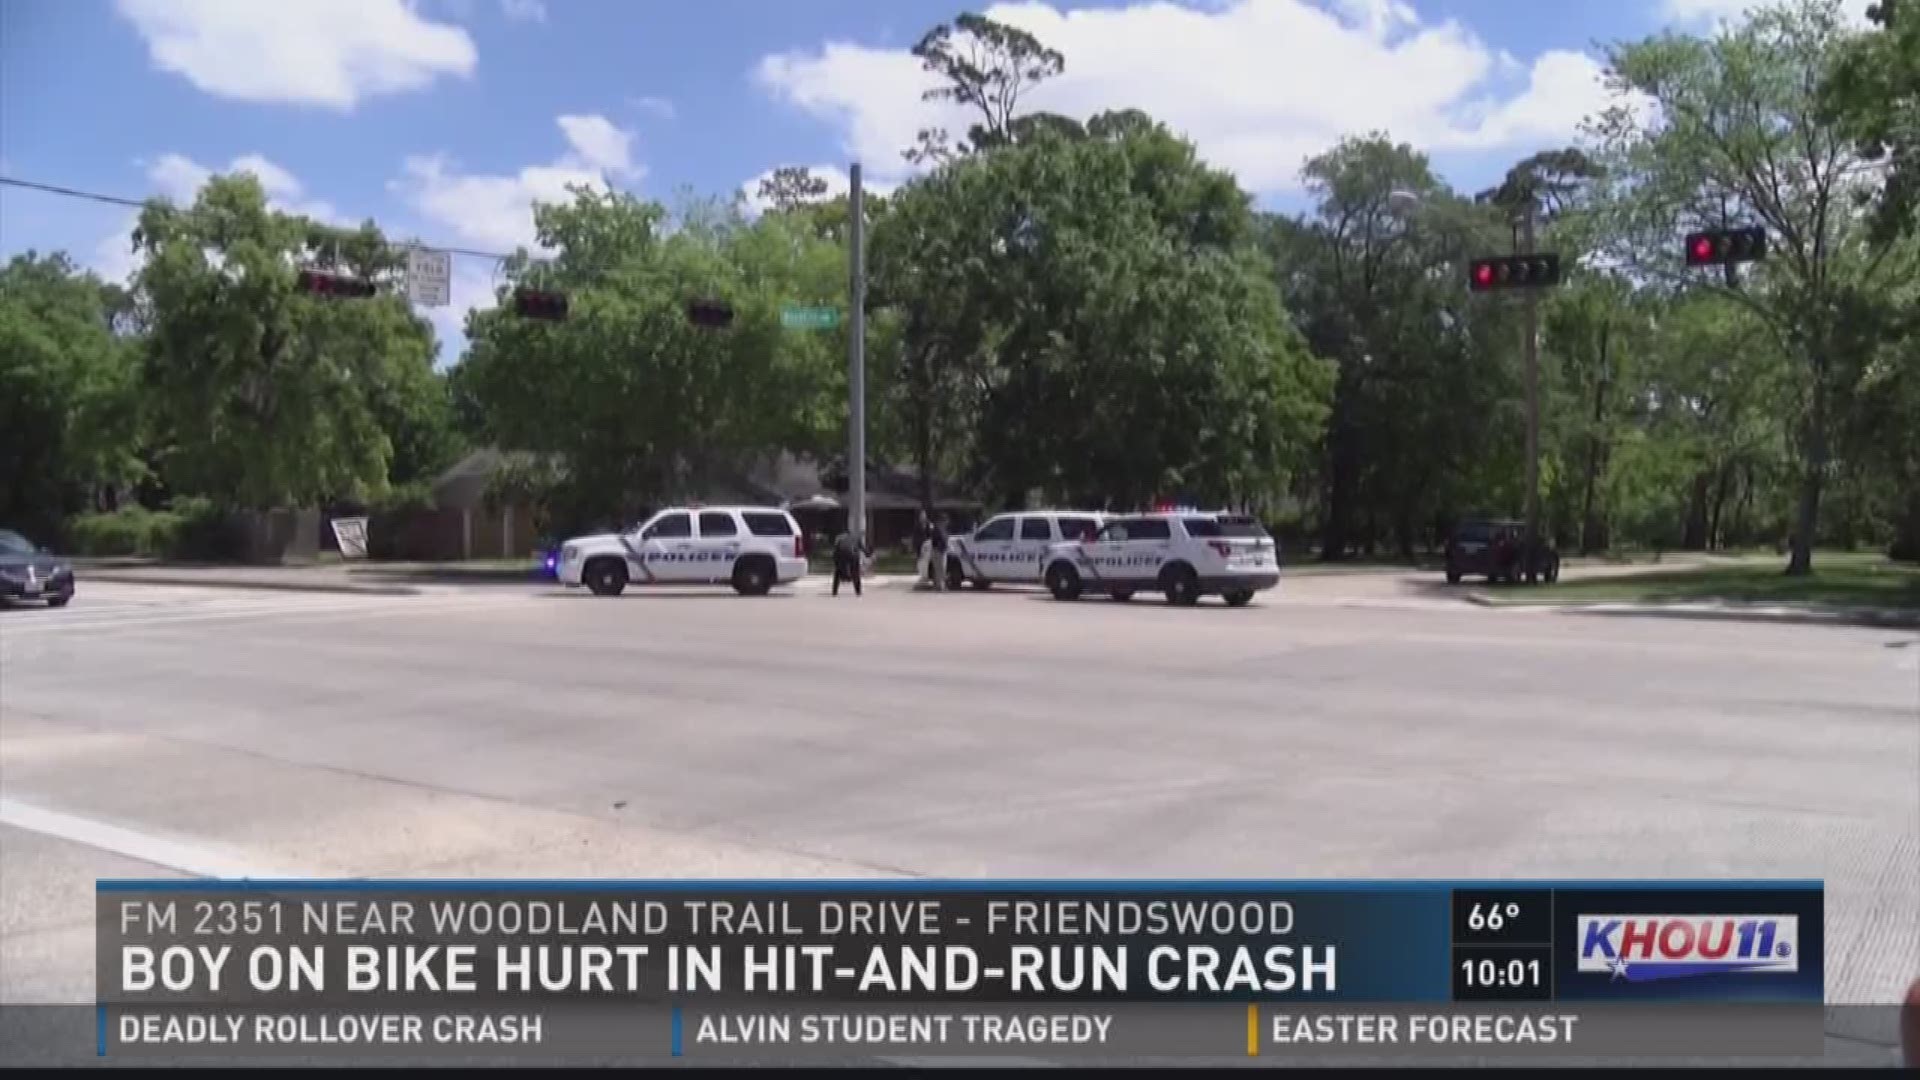 A man turned himself into police on Saturday after he hit a boy riding on a bicycle and fled the scene in Friendswood.